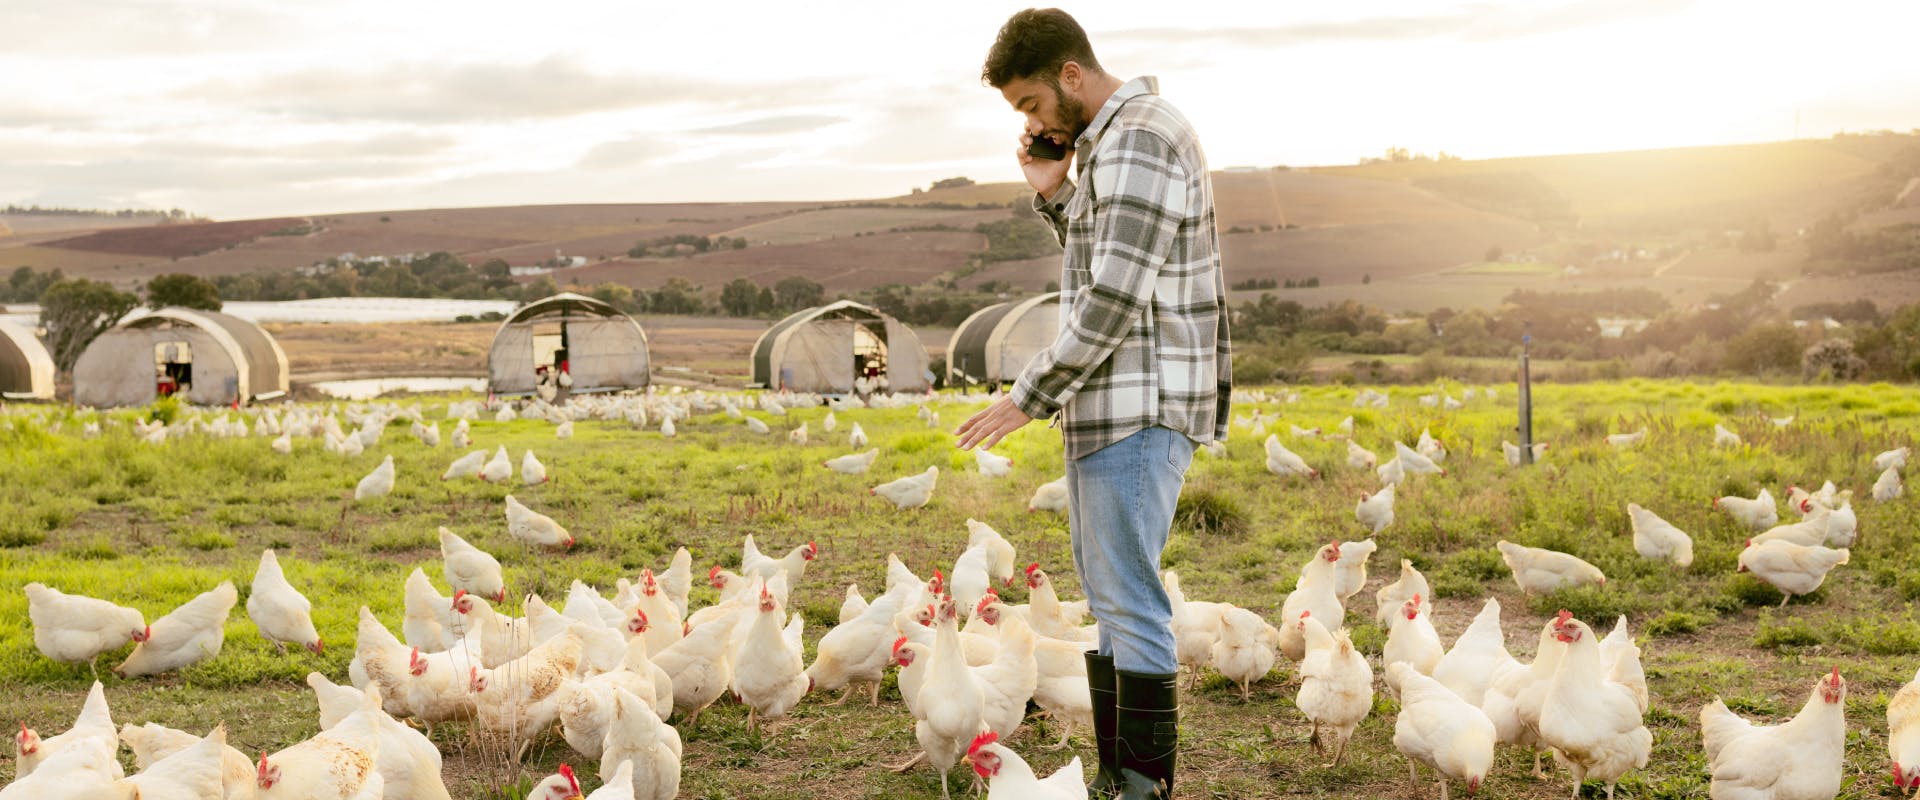 a man in a field surrounded by white chickens on a farm